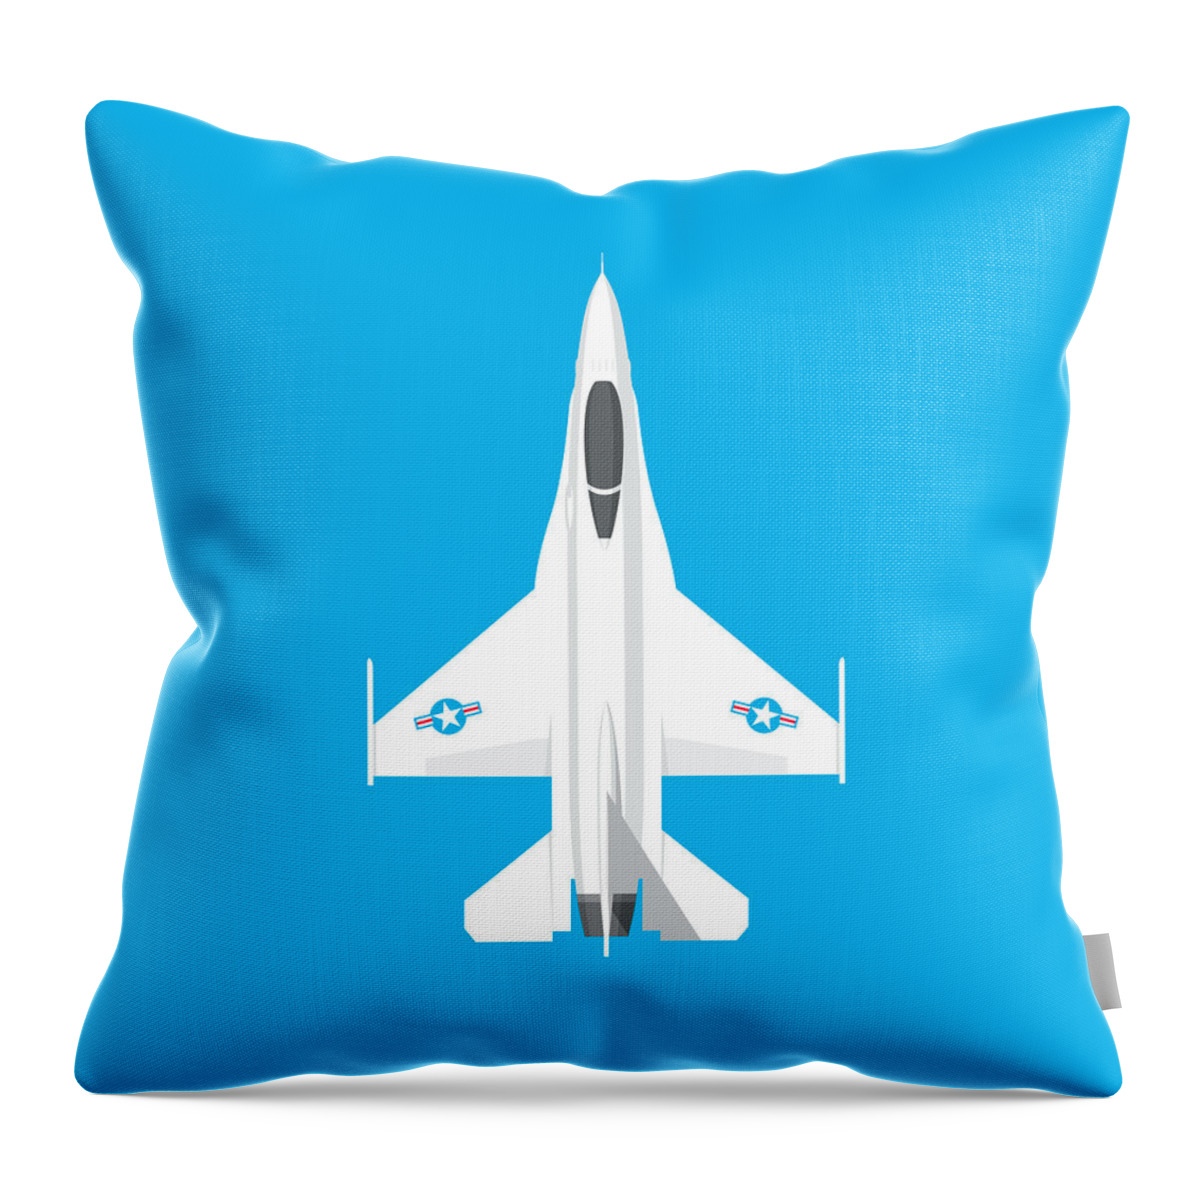 Fighter Throw Pillow featuring the digital art F-16 Falcon Fighter Jet Aircraft - Cyan by Organic Synthesis